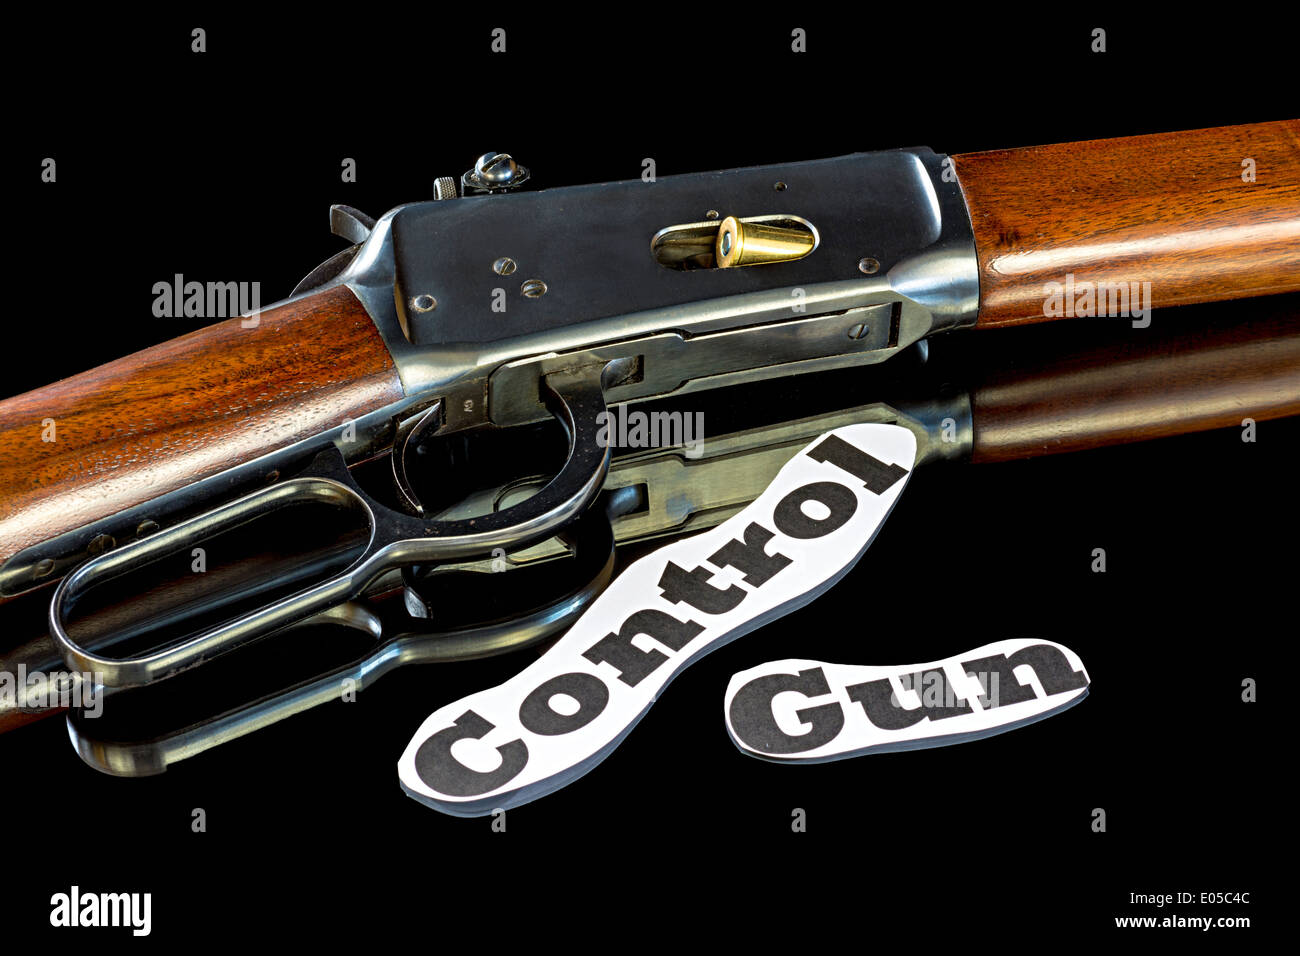 Western rifle leaver action with gun control words Stock Photo